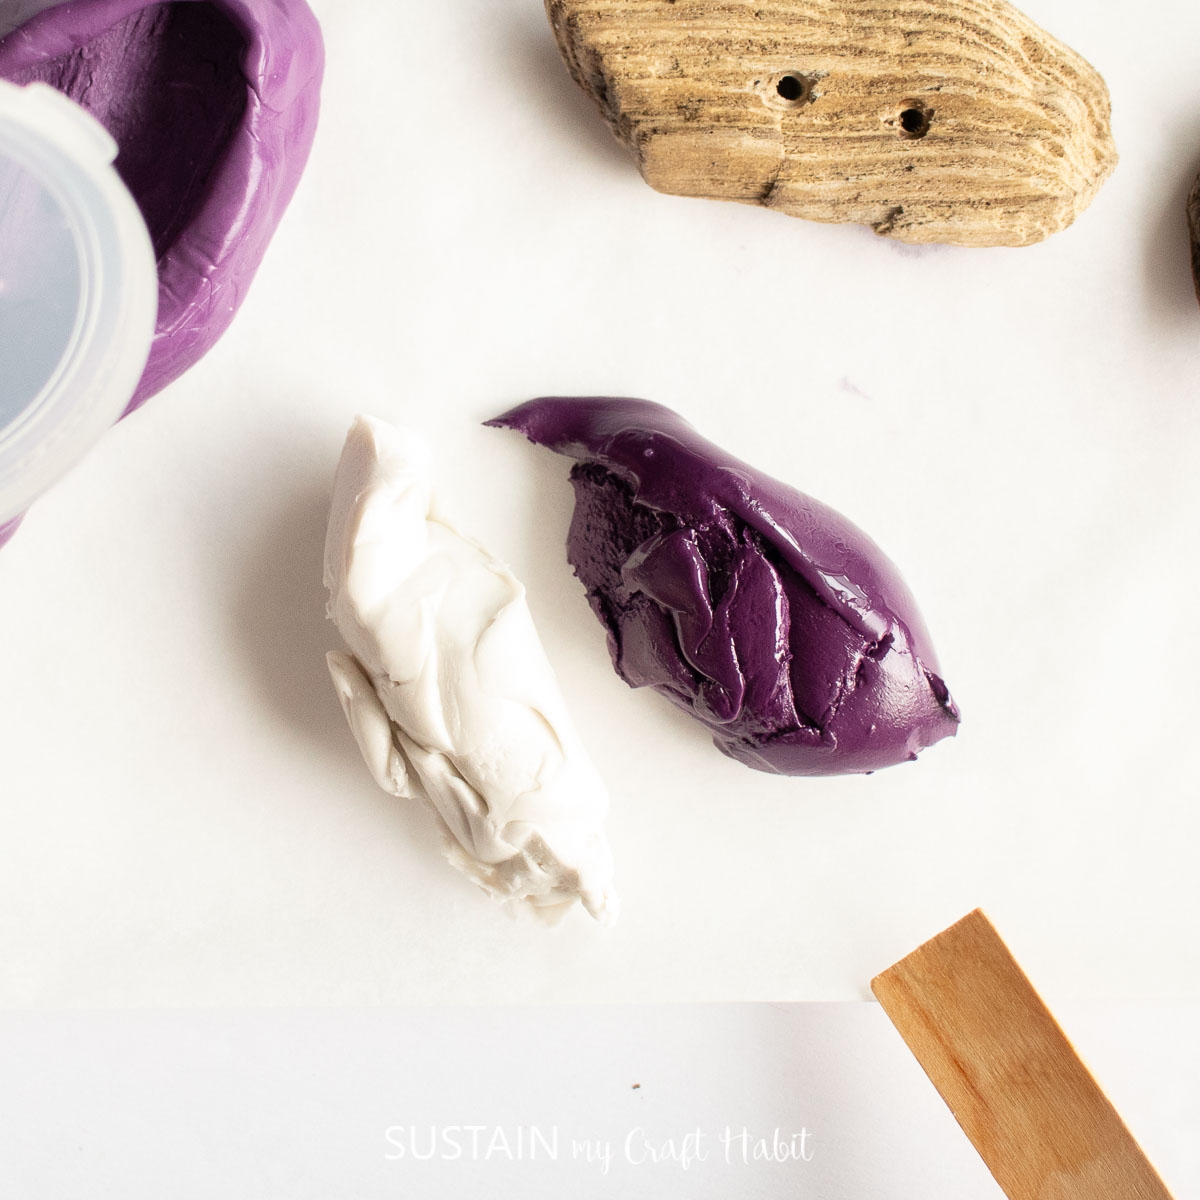 Measuring purple and white silicone putty.